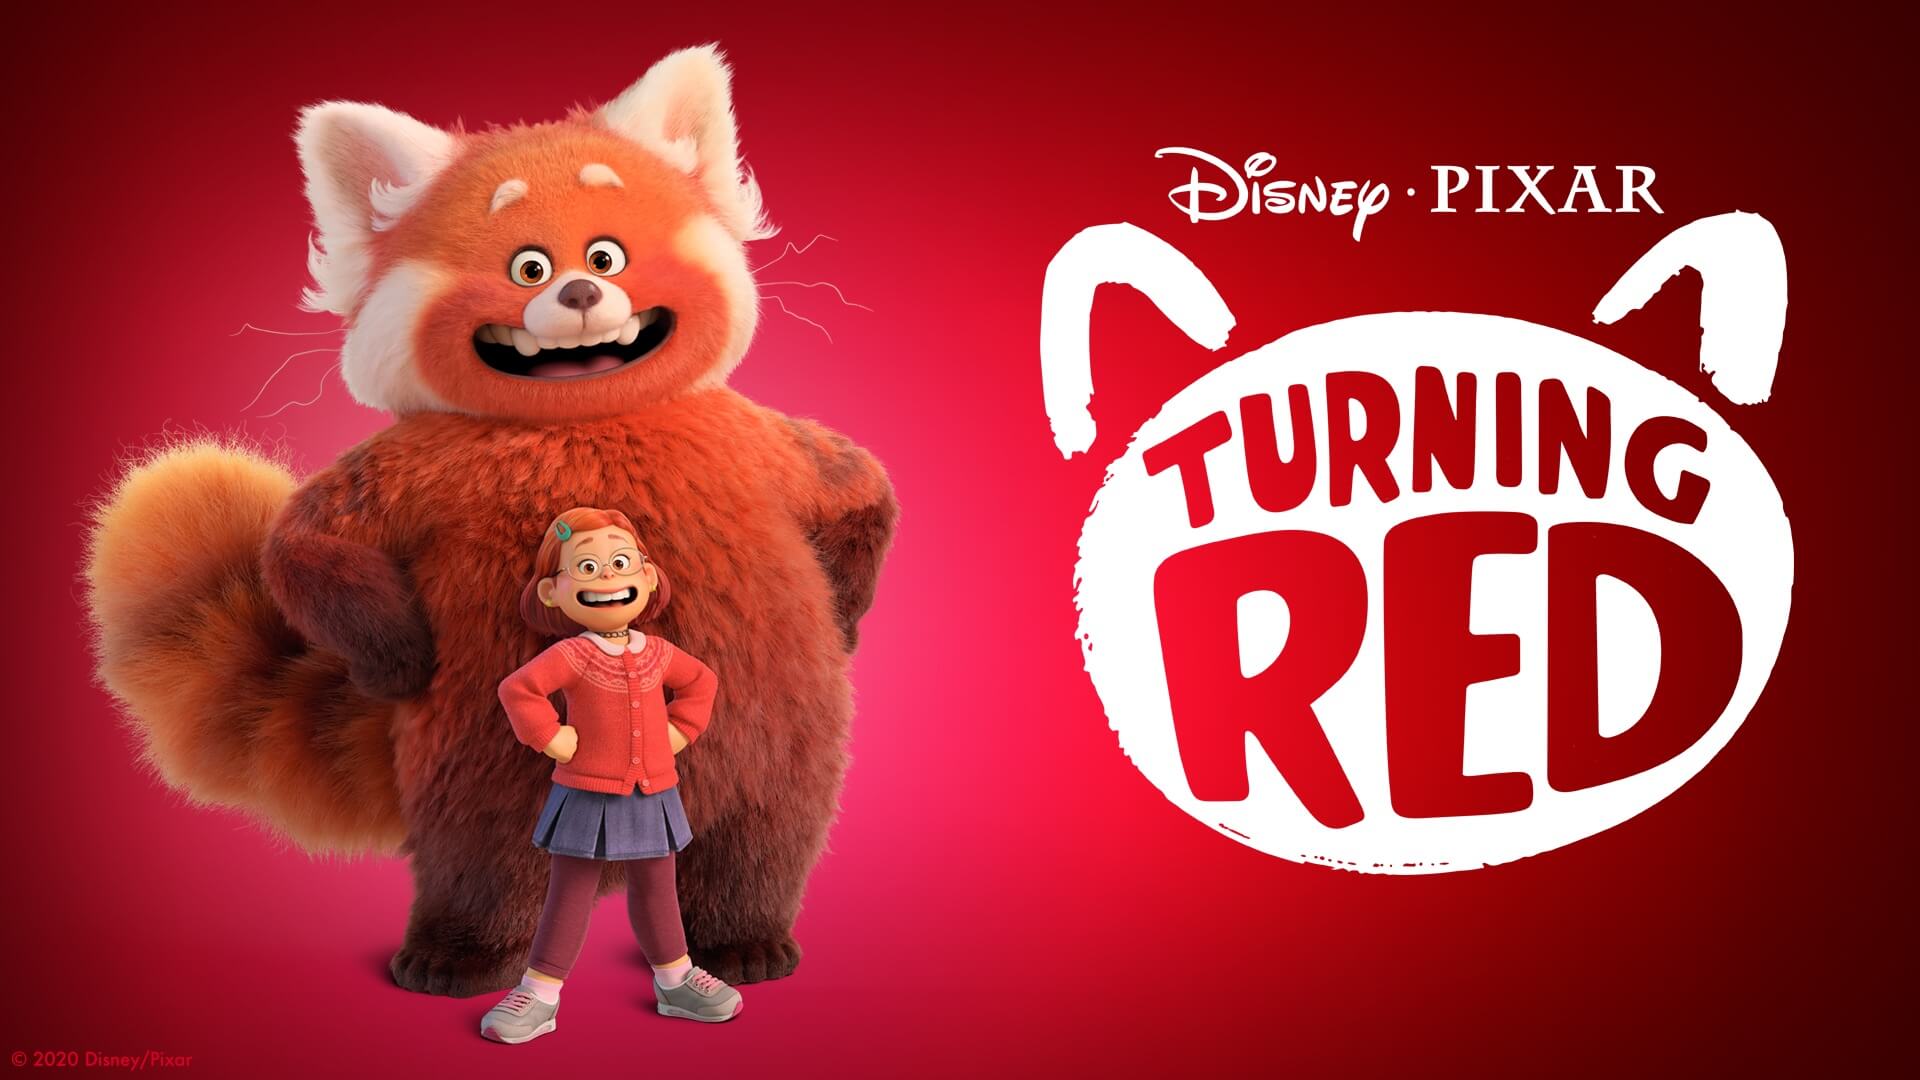 Exclusive: Trailers for Pixar’s ‘Turning Red’ Are Coming Very Soon